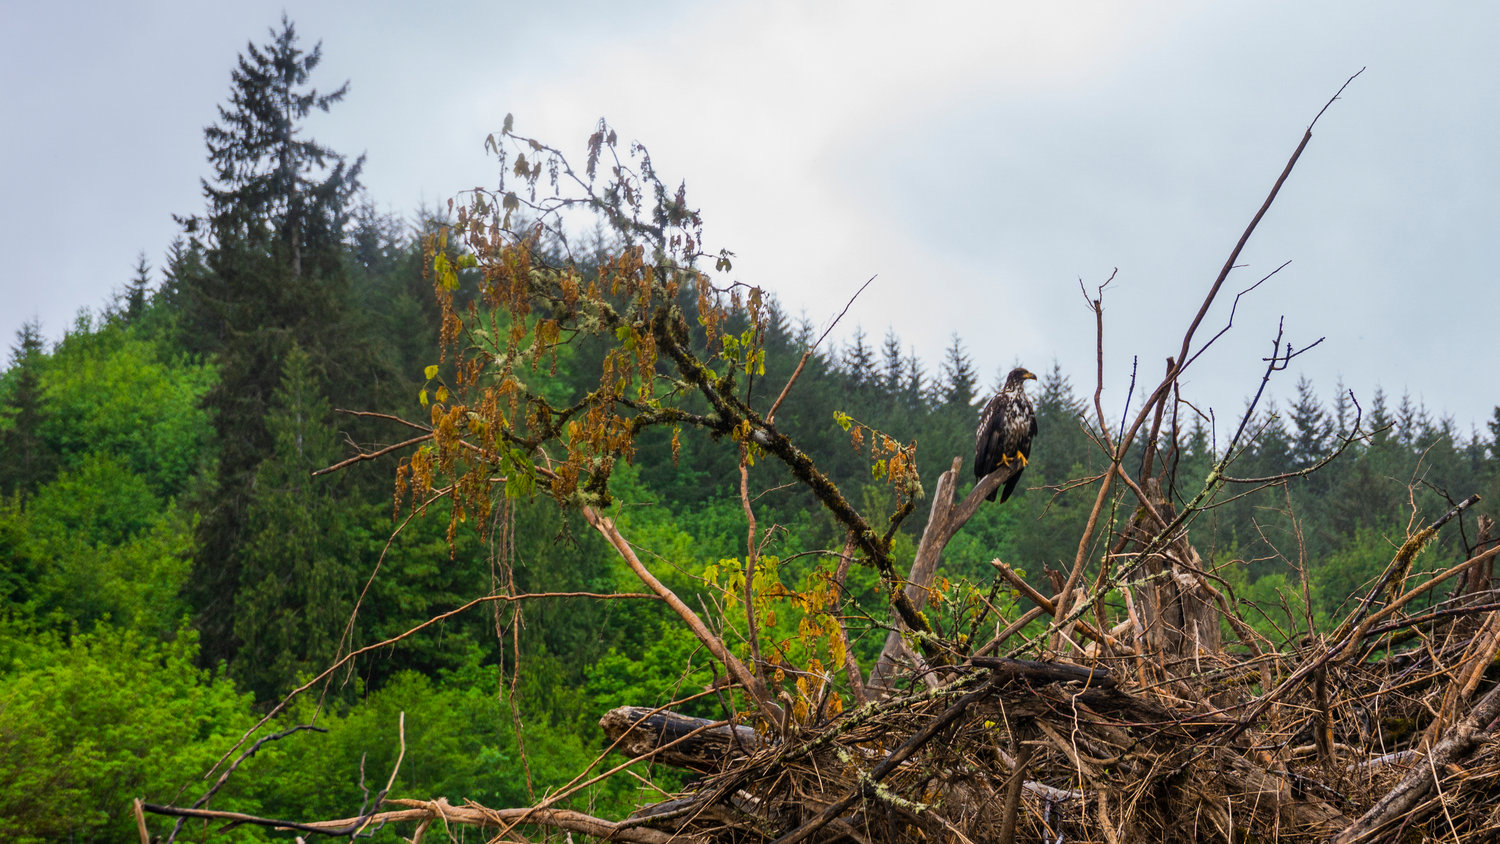 An eagle rests on a snag over the Chehalis River near Rochester.